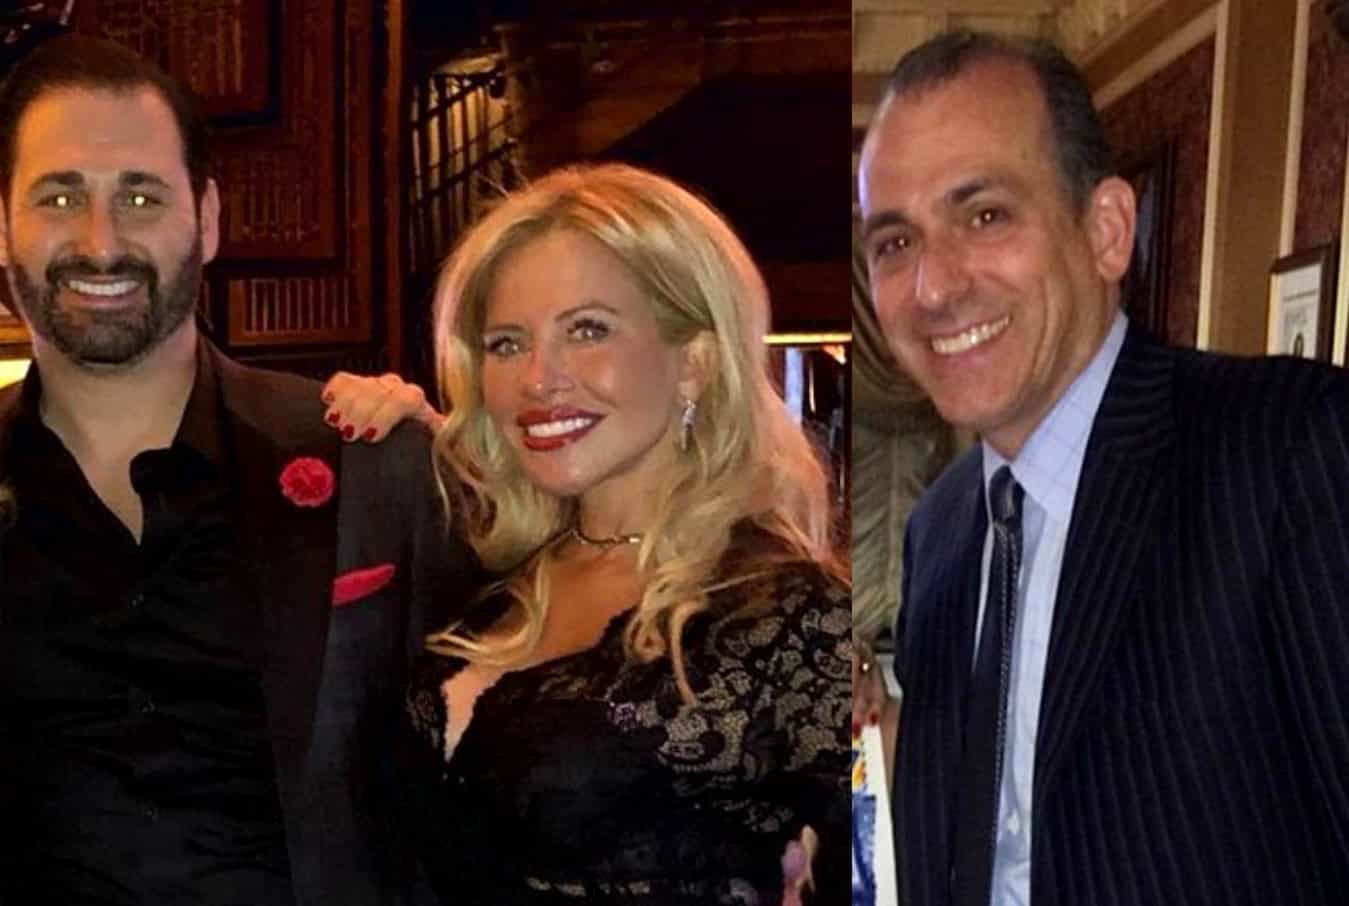 RHONJ: Dina Manzo's Ex Tommy Manzo Charged in Her 2017 Home Invasion as Prosecutors Allege He Was an Accomplice